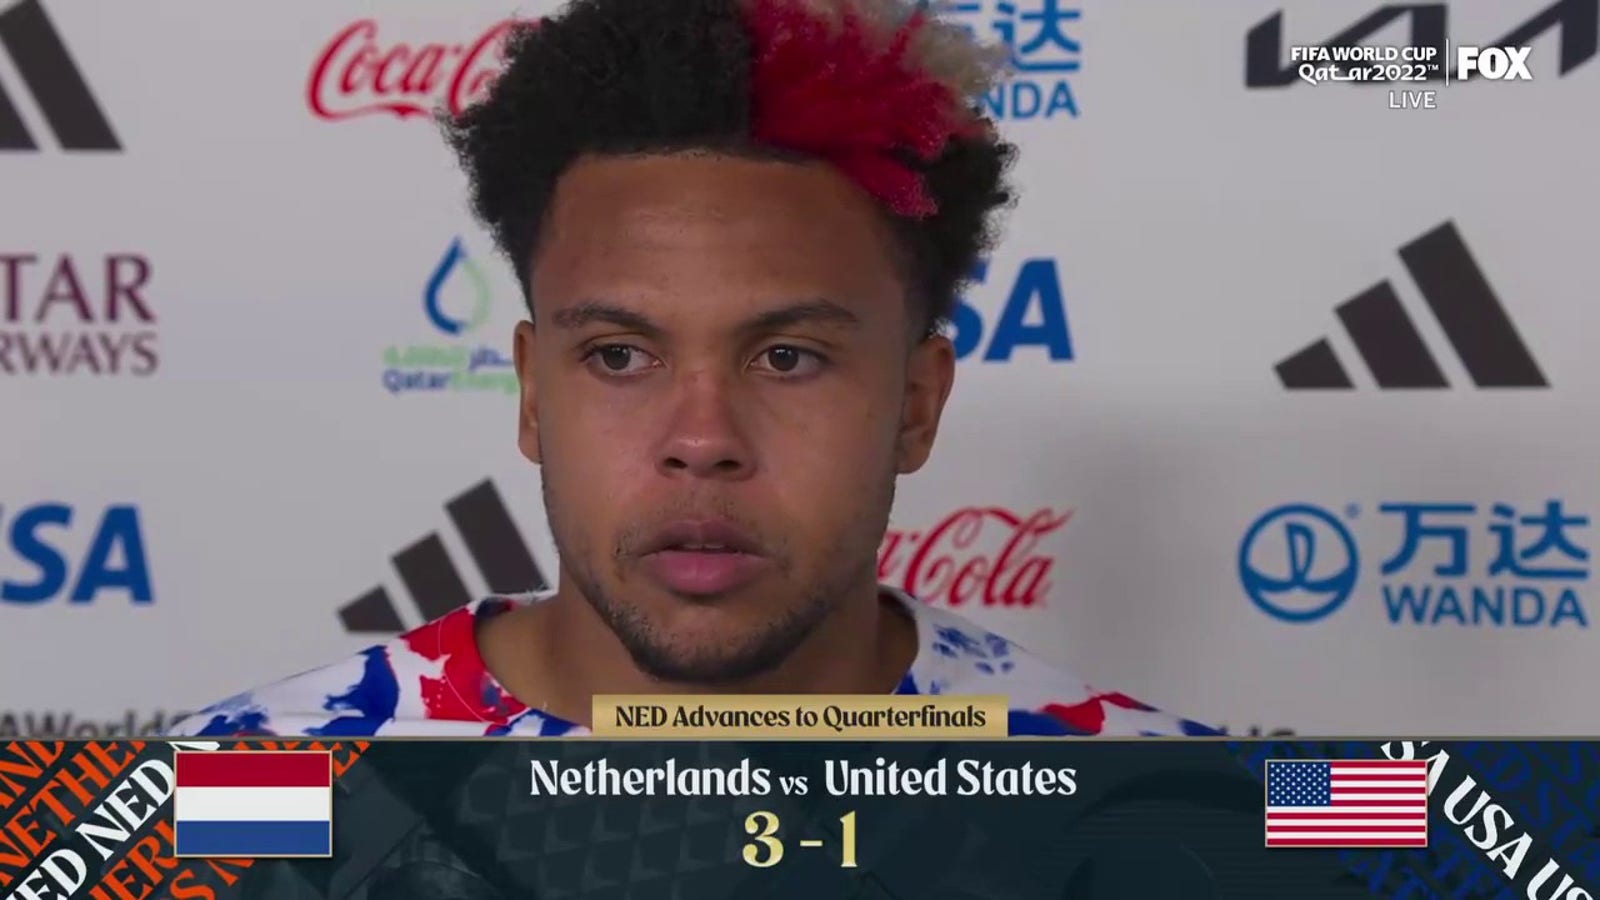 'We didn't want the journey to end' - an emotional Weston McKennie discusses USMNT mindset moving forward after a tough loss